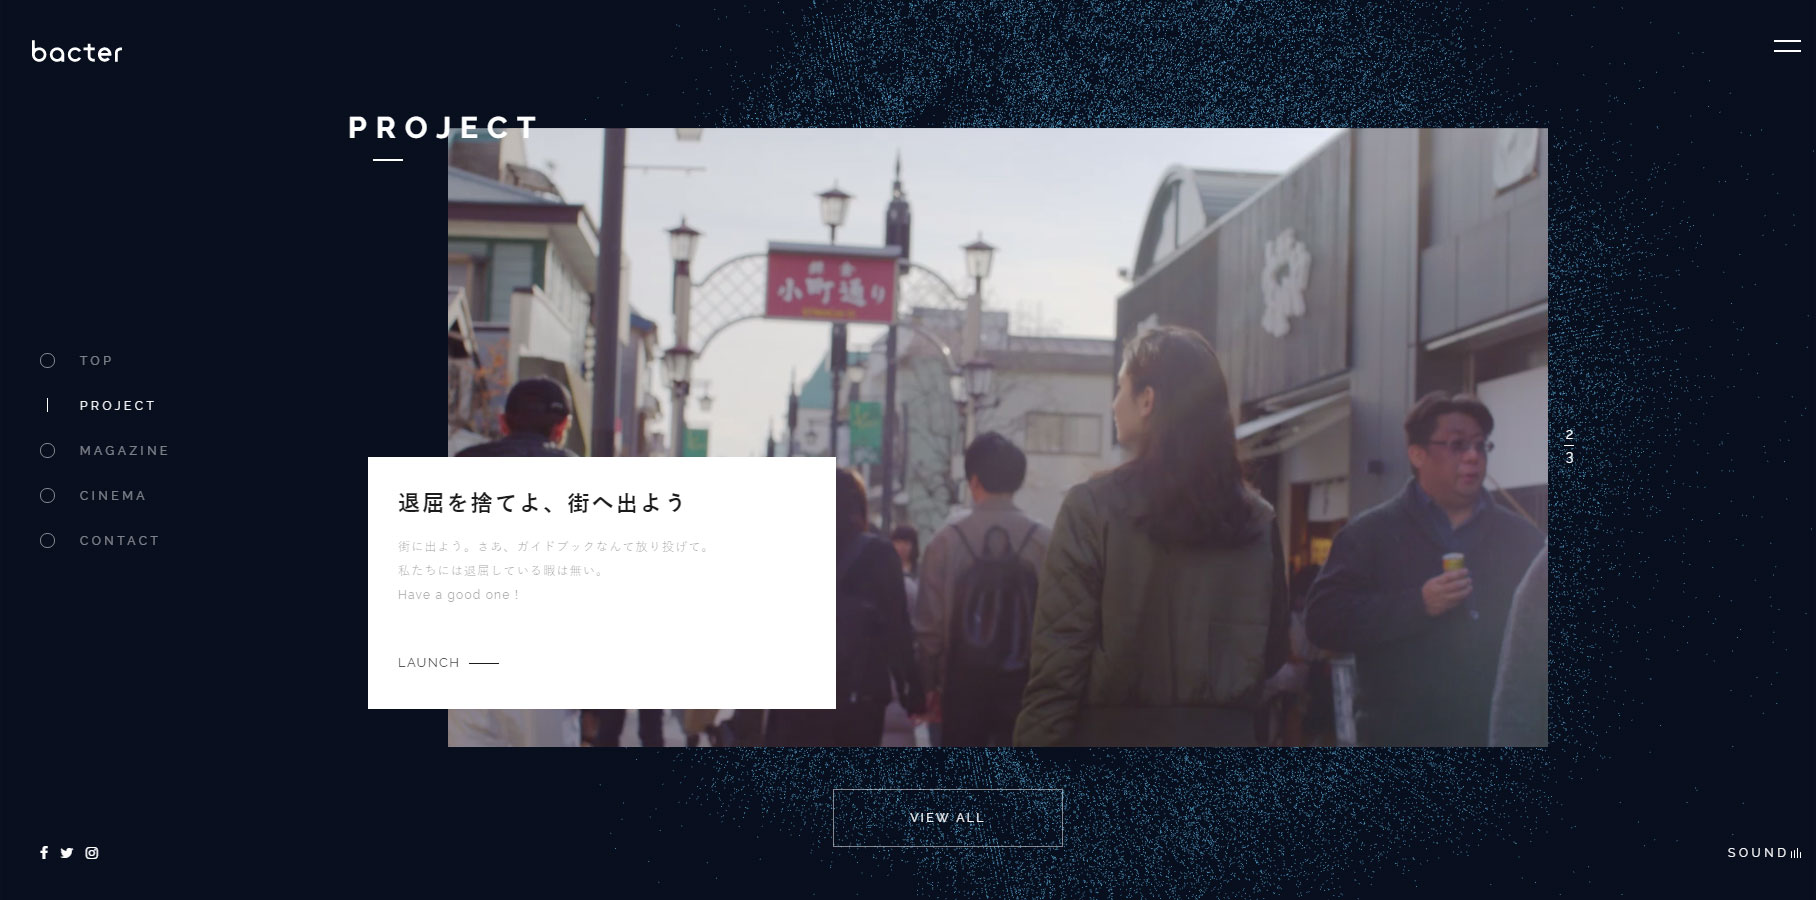 bacter - Website of the Day